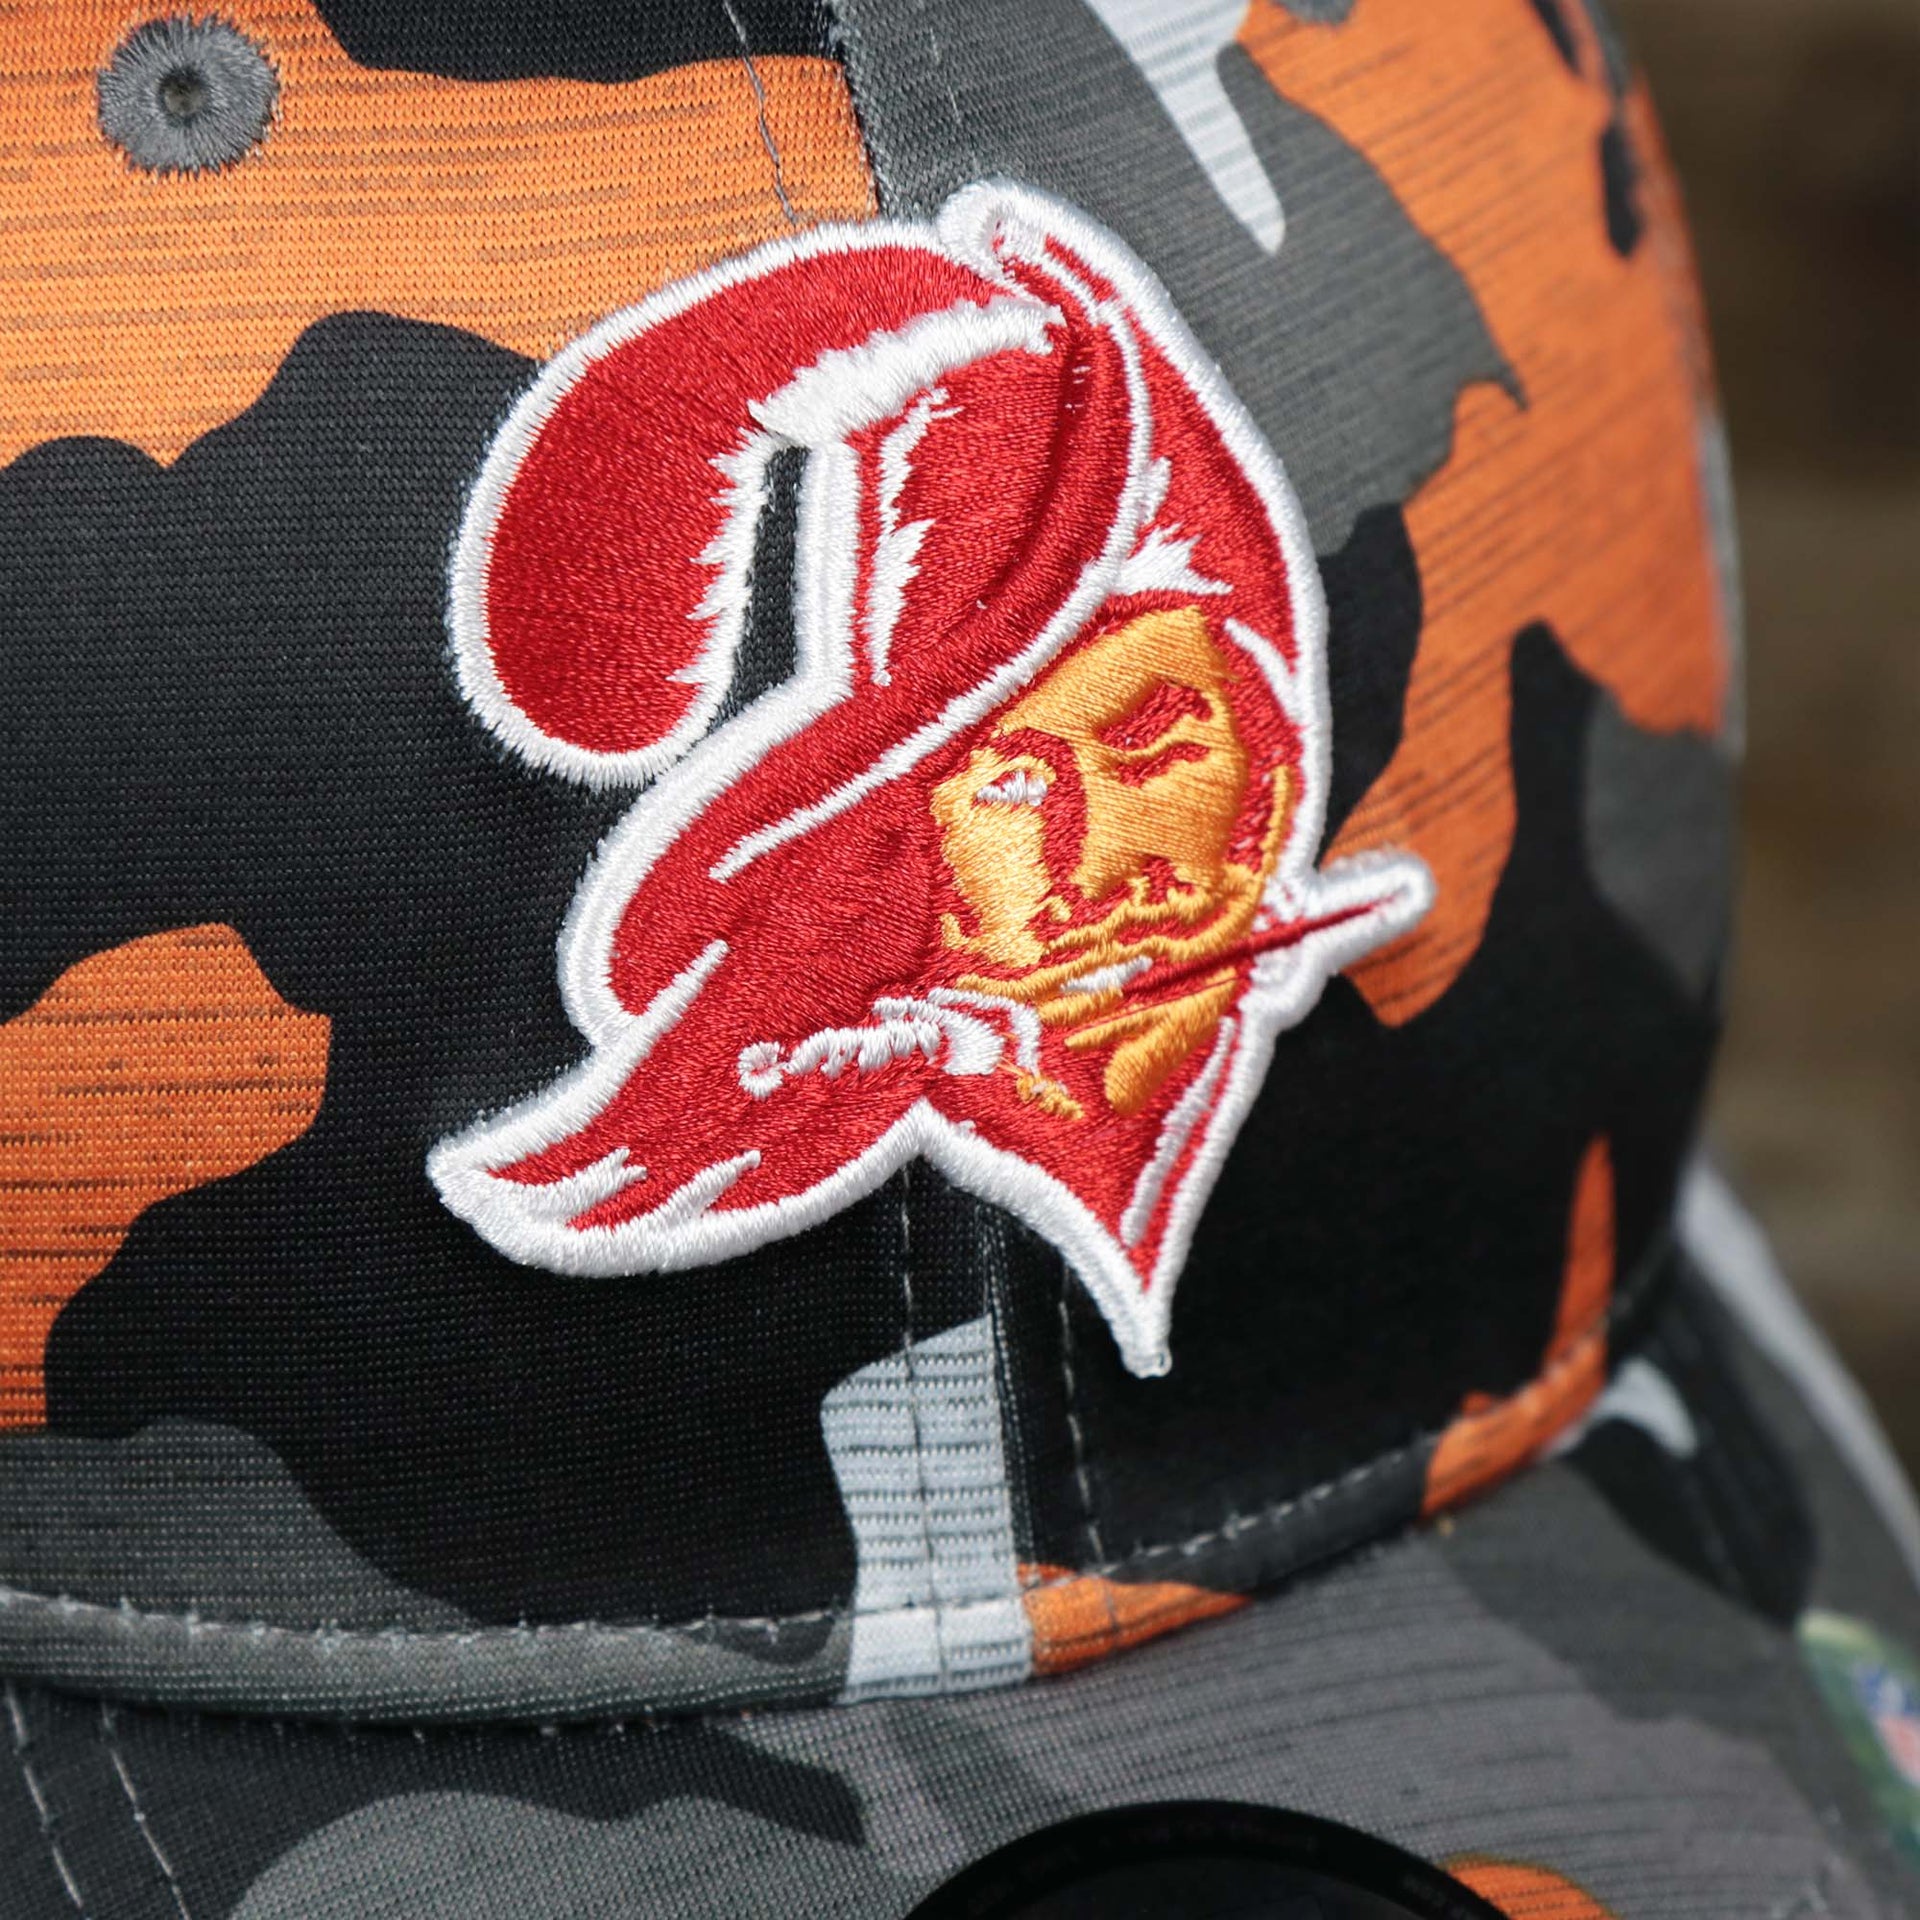 The buccaneers logo on the Throwback Tampa Bay Buccaneers OnField NFL Summer Training 2022 39Thirty Camo FlexFit Cap | New Era Orange